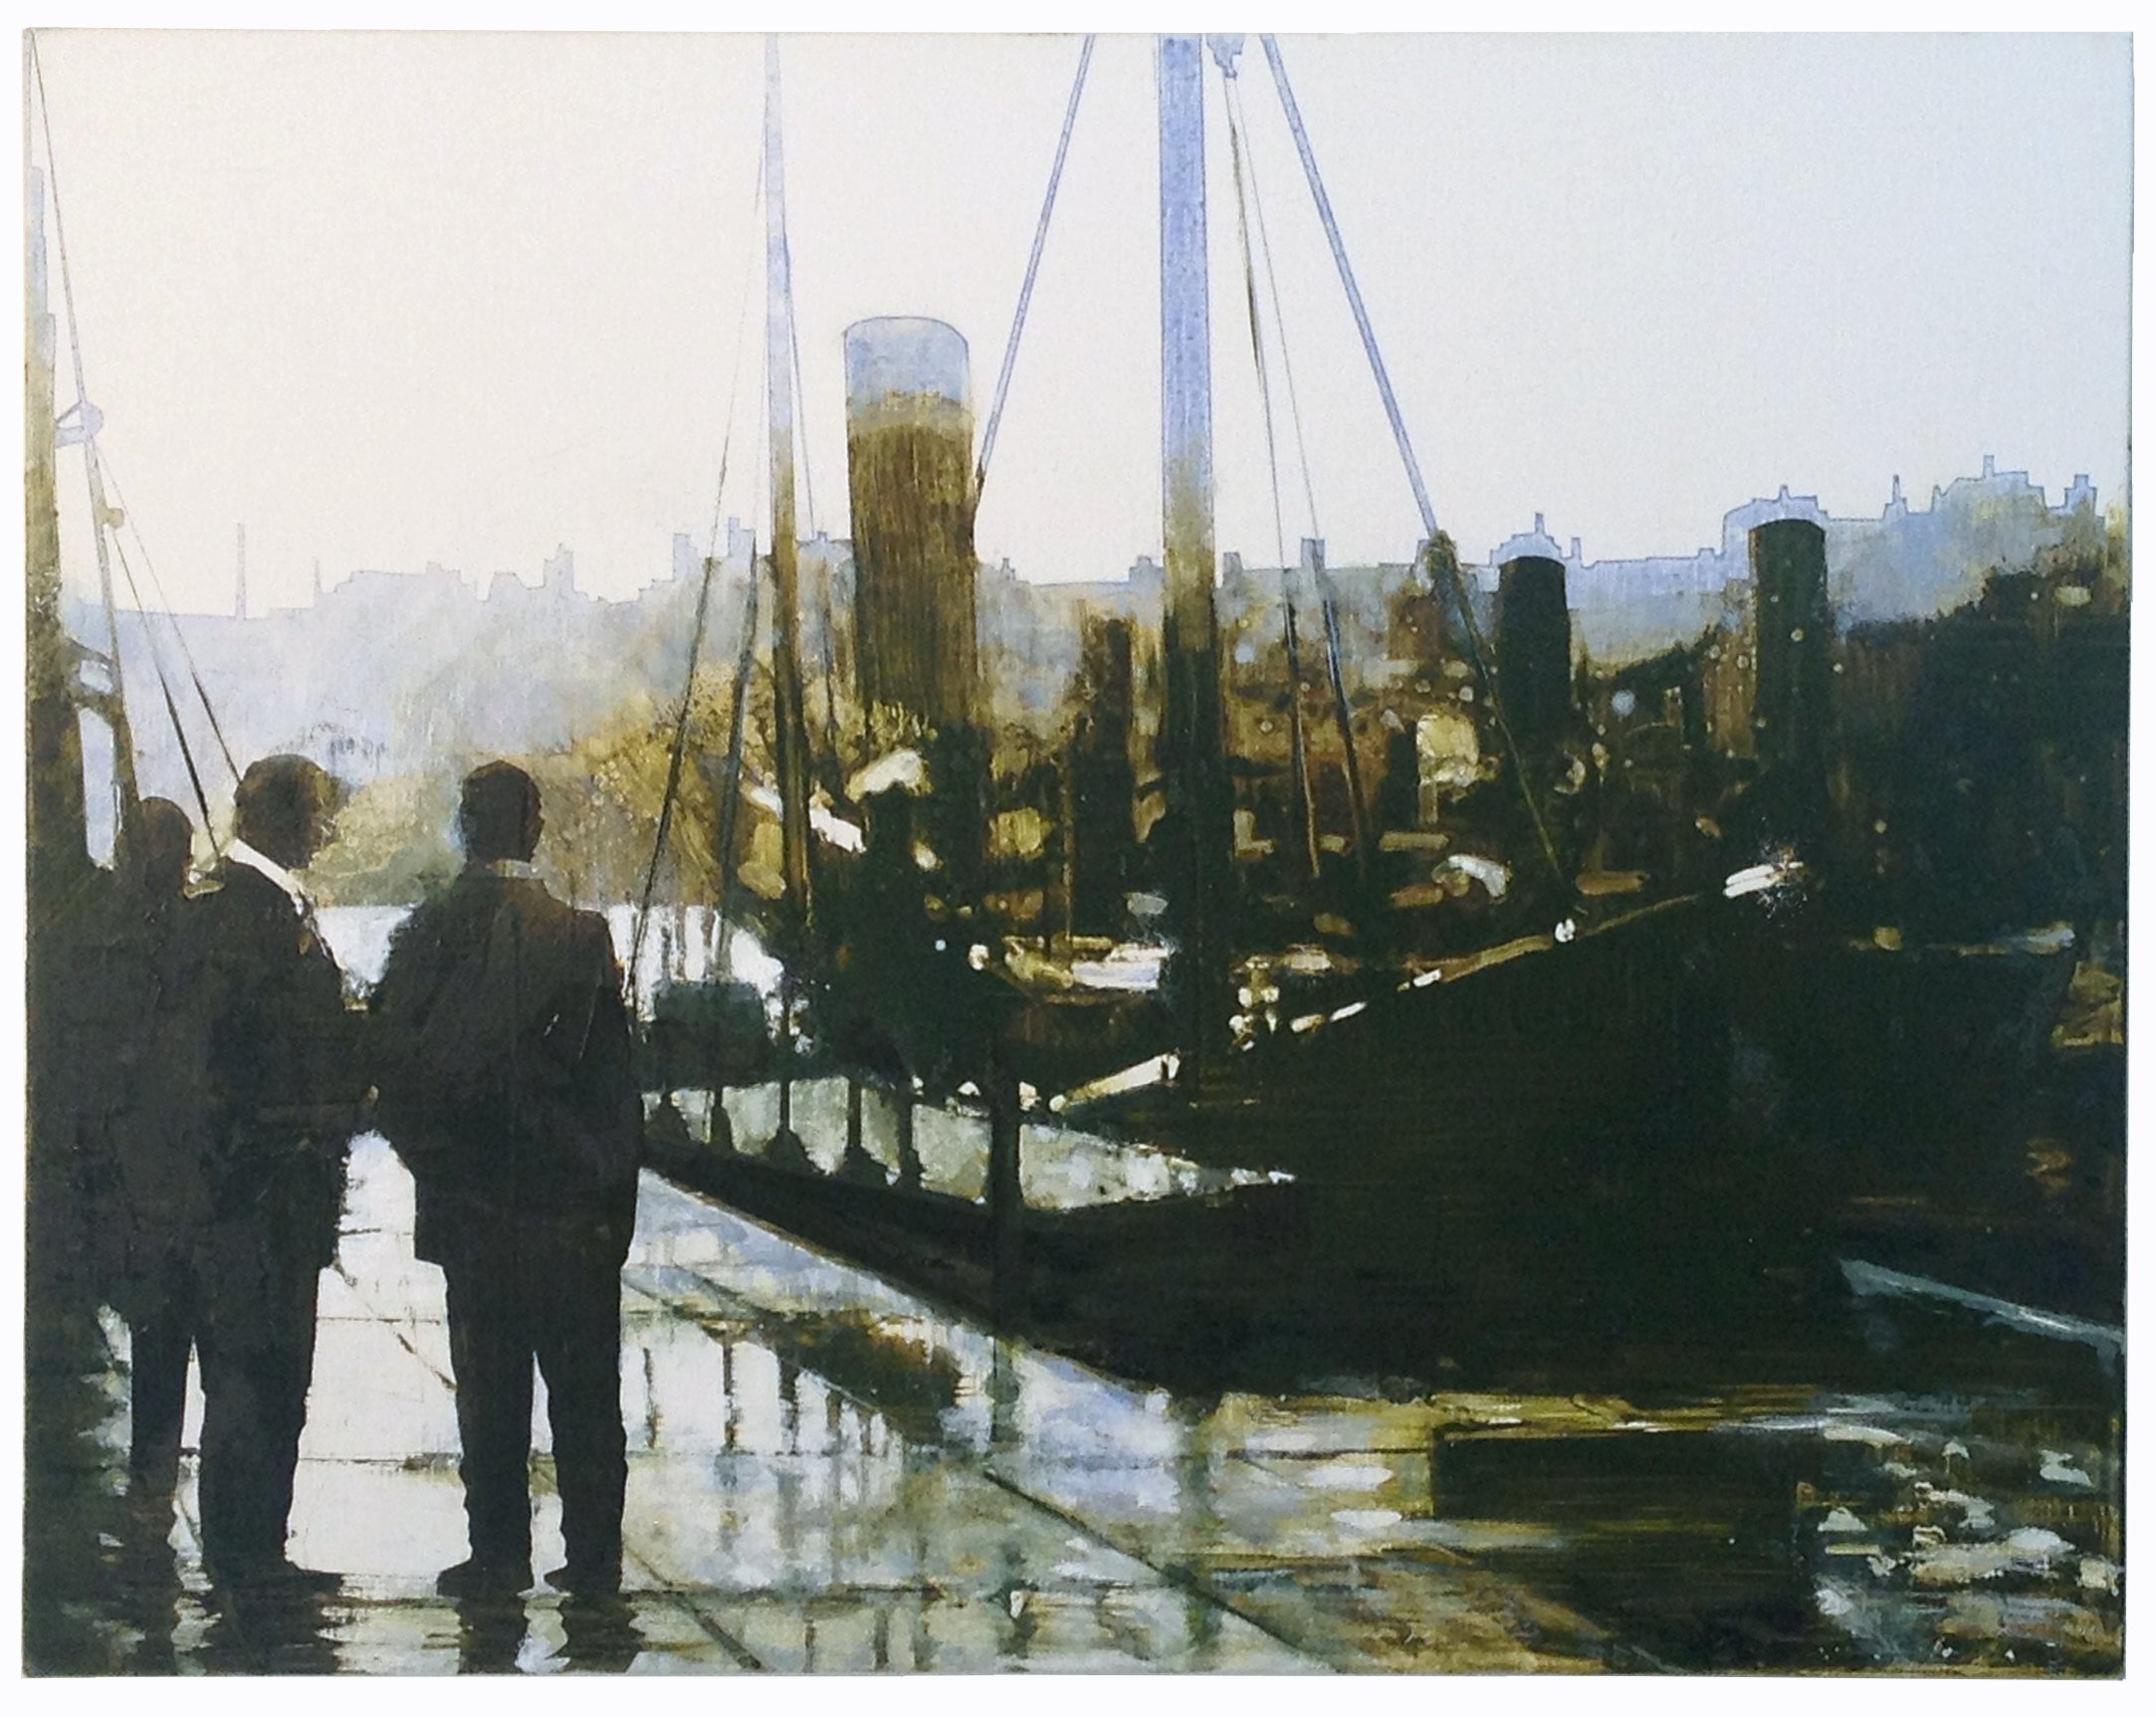  Dock 3 18x23inches (45x58cm) Oil on linen 2014 